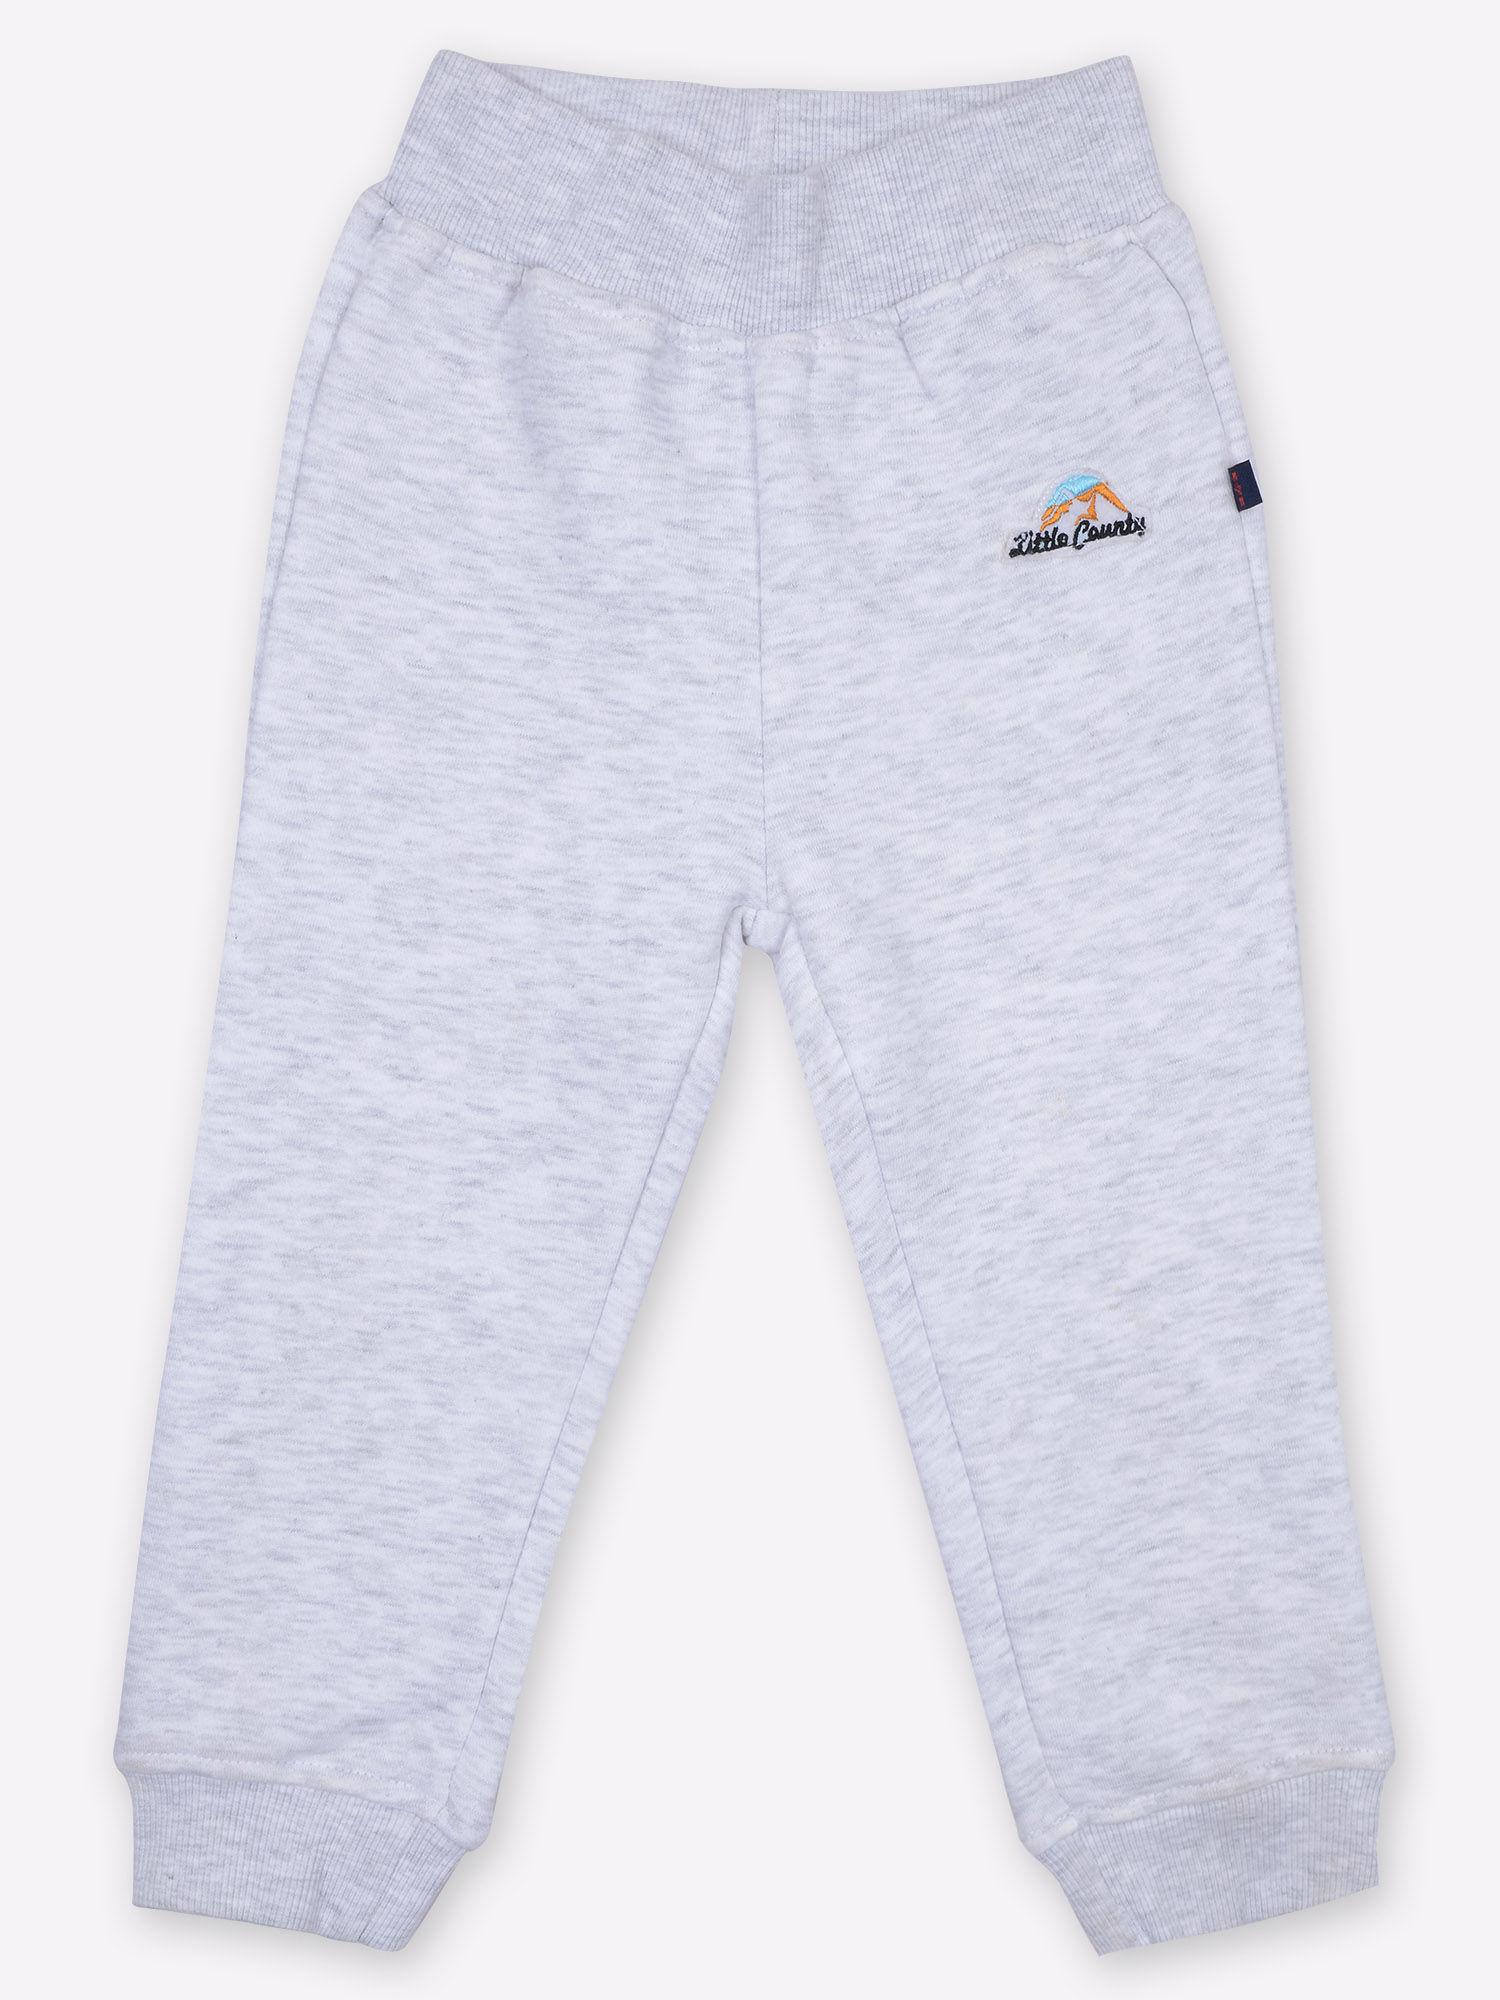 boys solid joggers track pant - grey